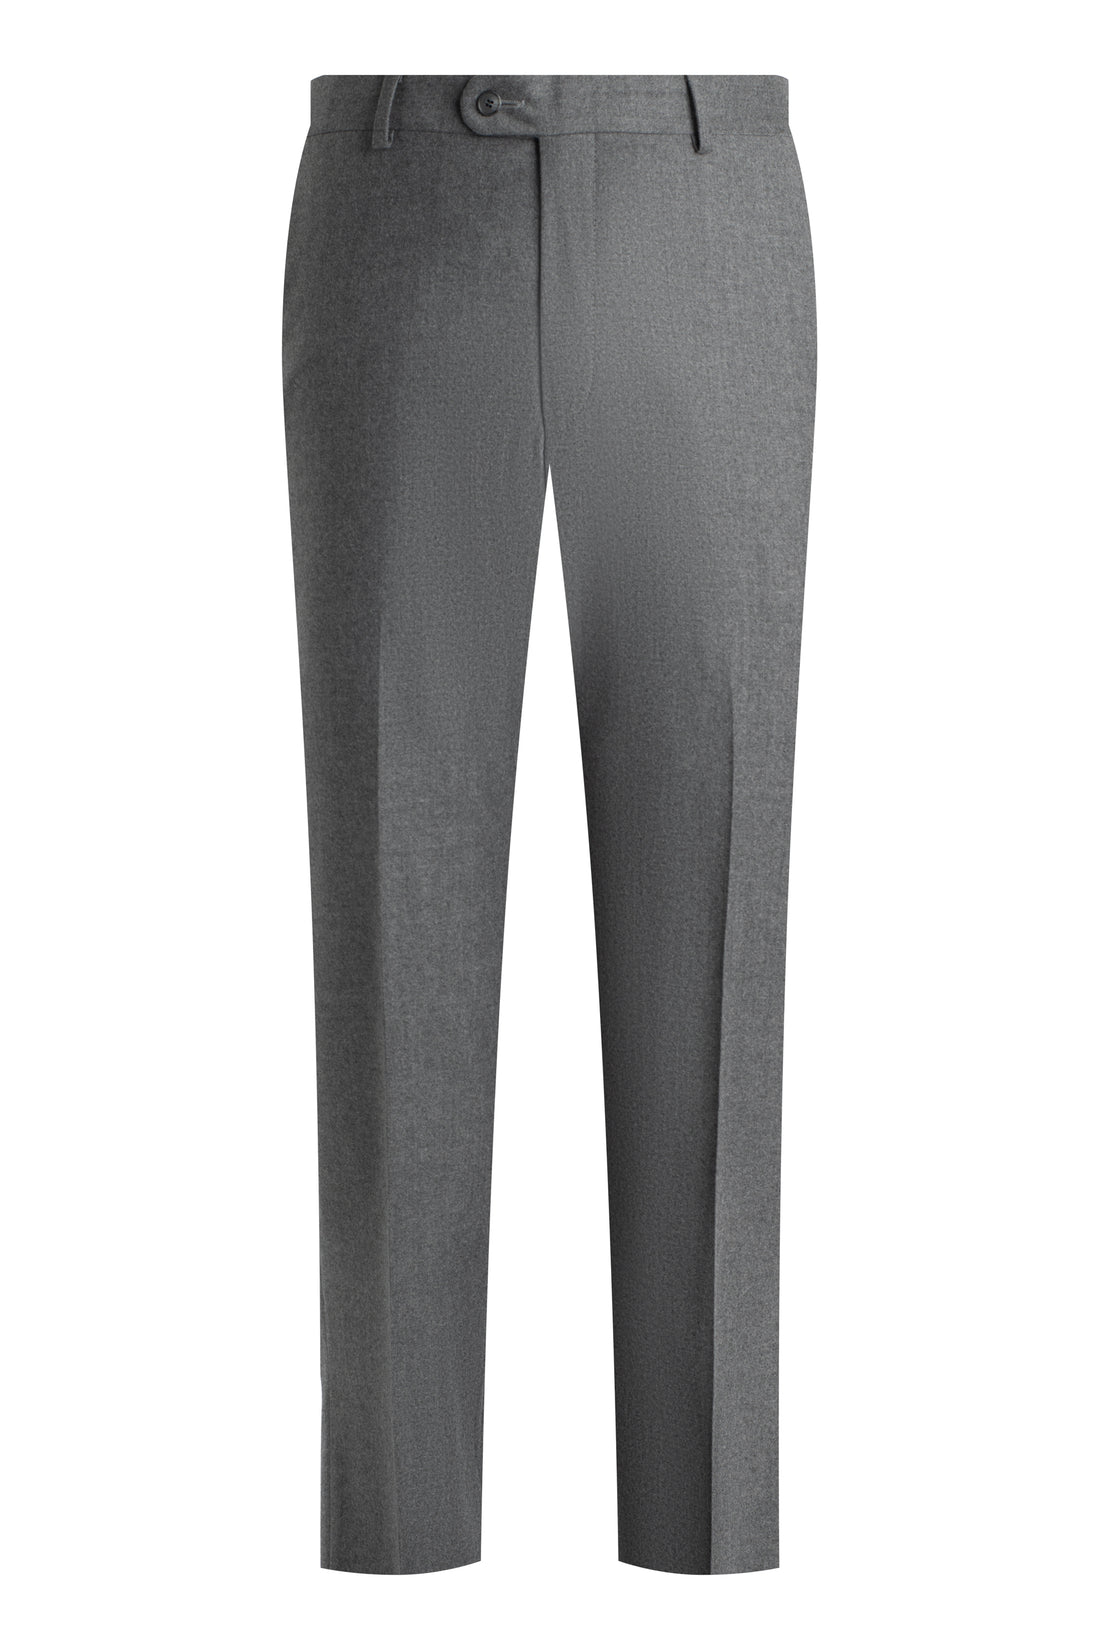 Grey S150 Flannel Trousers front